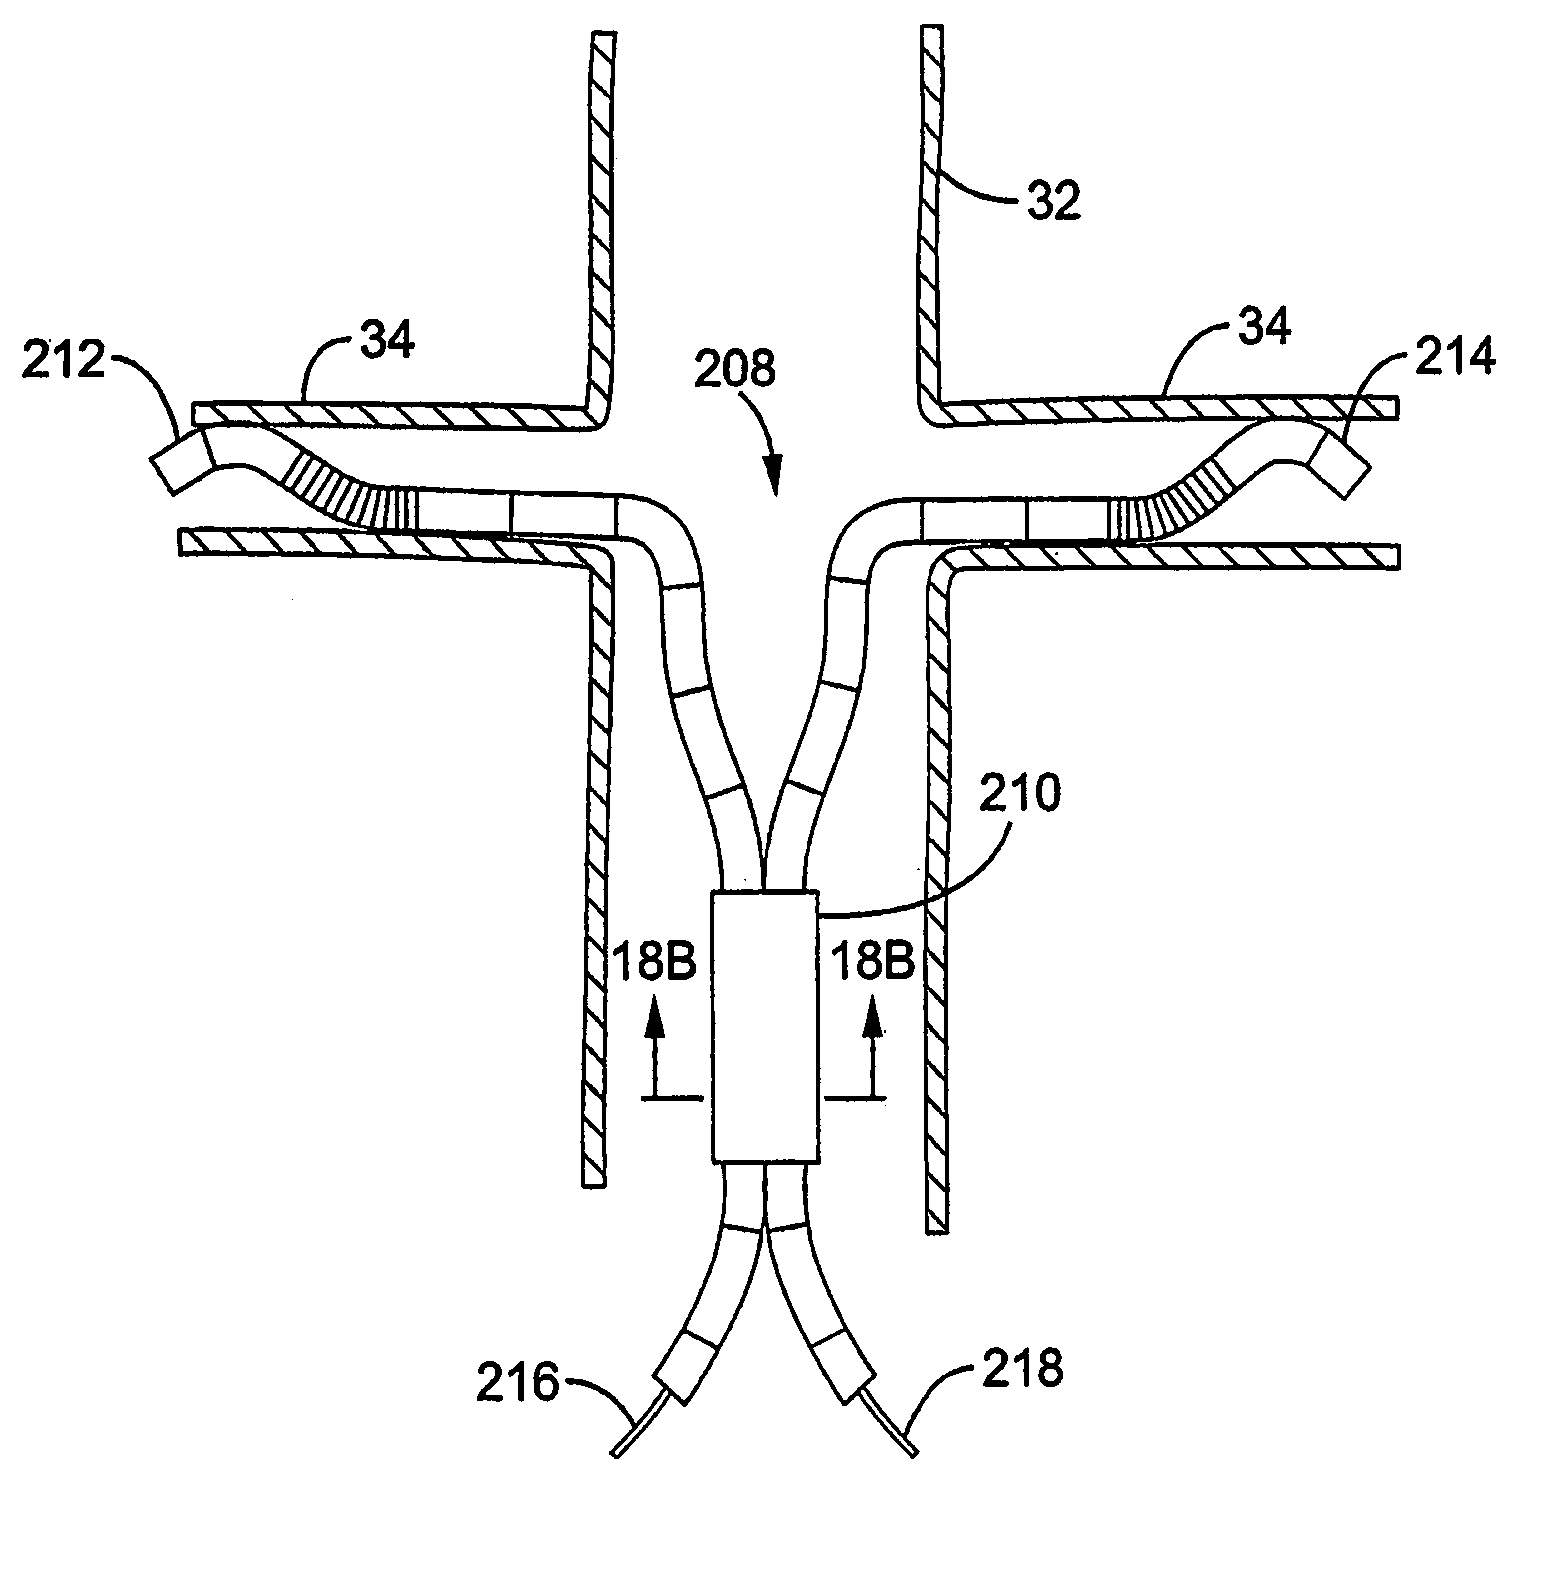 Systems and methods for performing bi-lateral interventions or diagnosis in branched body lumens